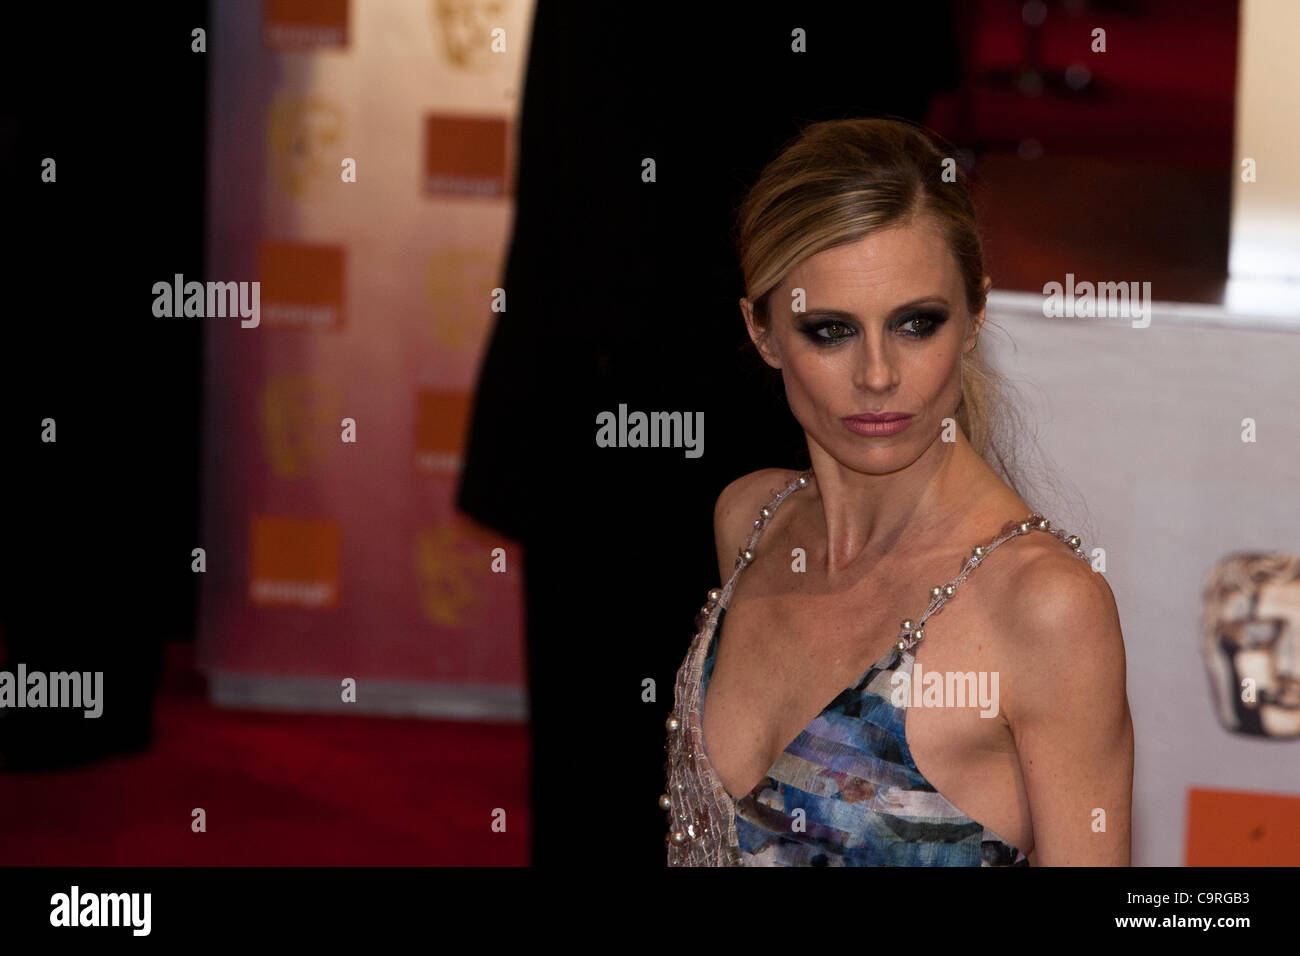 London, UK, 12/02/2012. Actress,  Laura Bailey, arriving on the red carpet to attend the 2012 BAFTAs Stock Photo